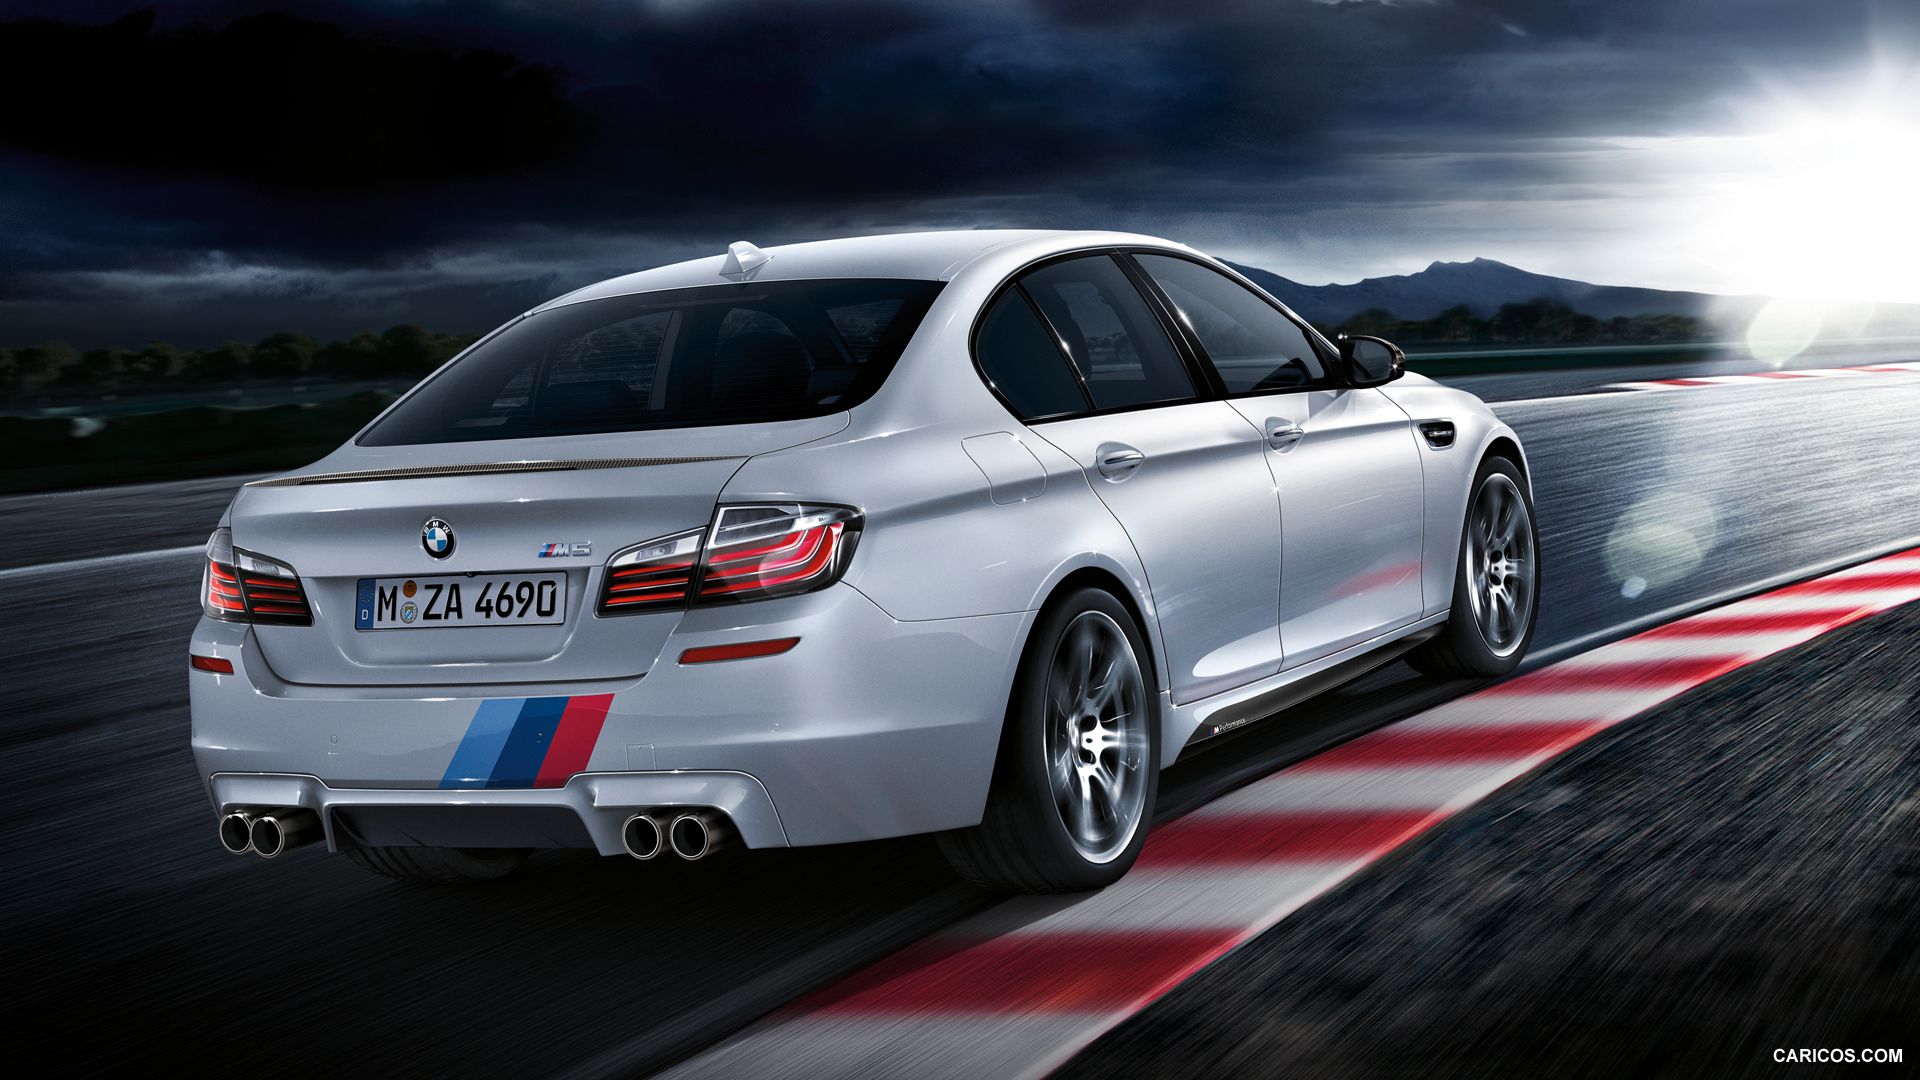 BMW M5 with M Performance Parts. HD Wallpaper